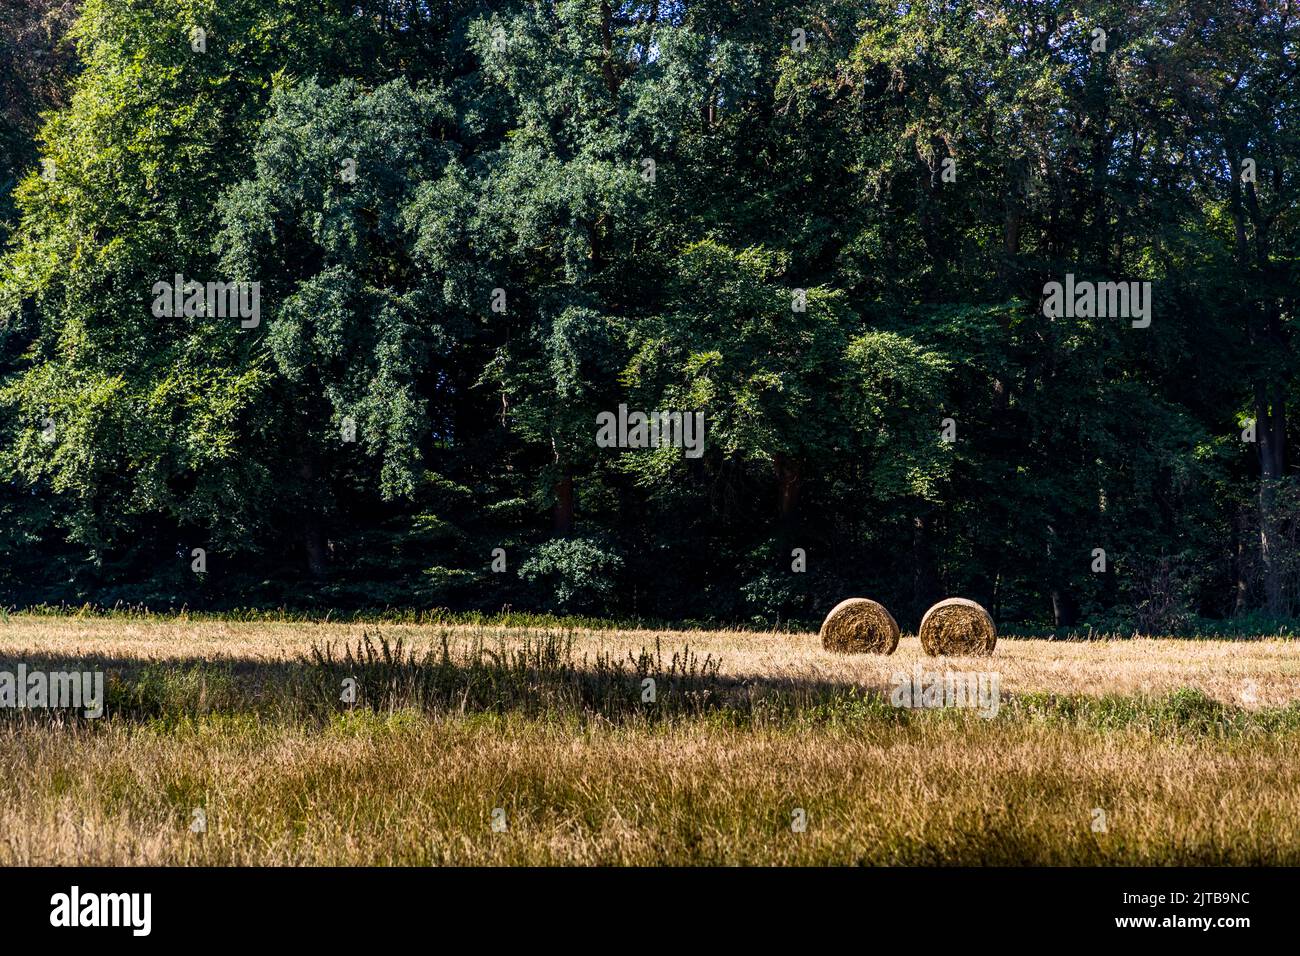 Straw rolls on a stubble field in the forest. Ambt Delden, Netherlands Stock Photo